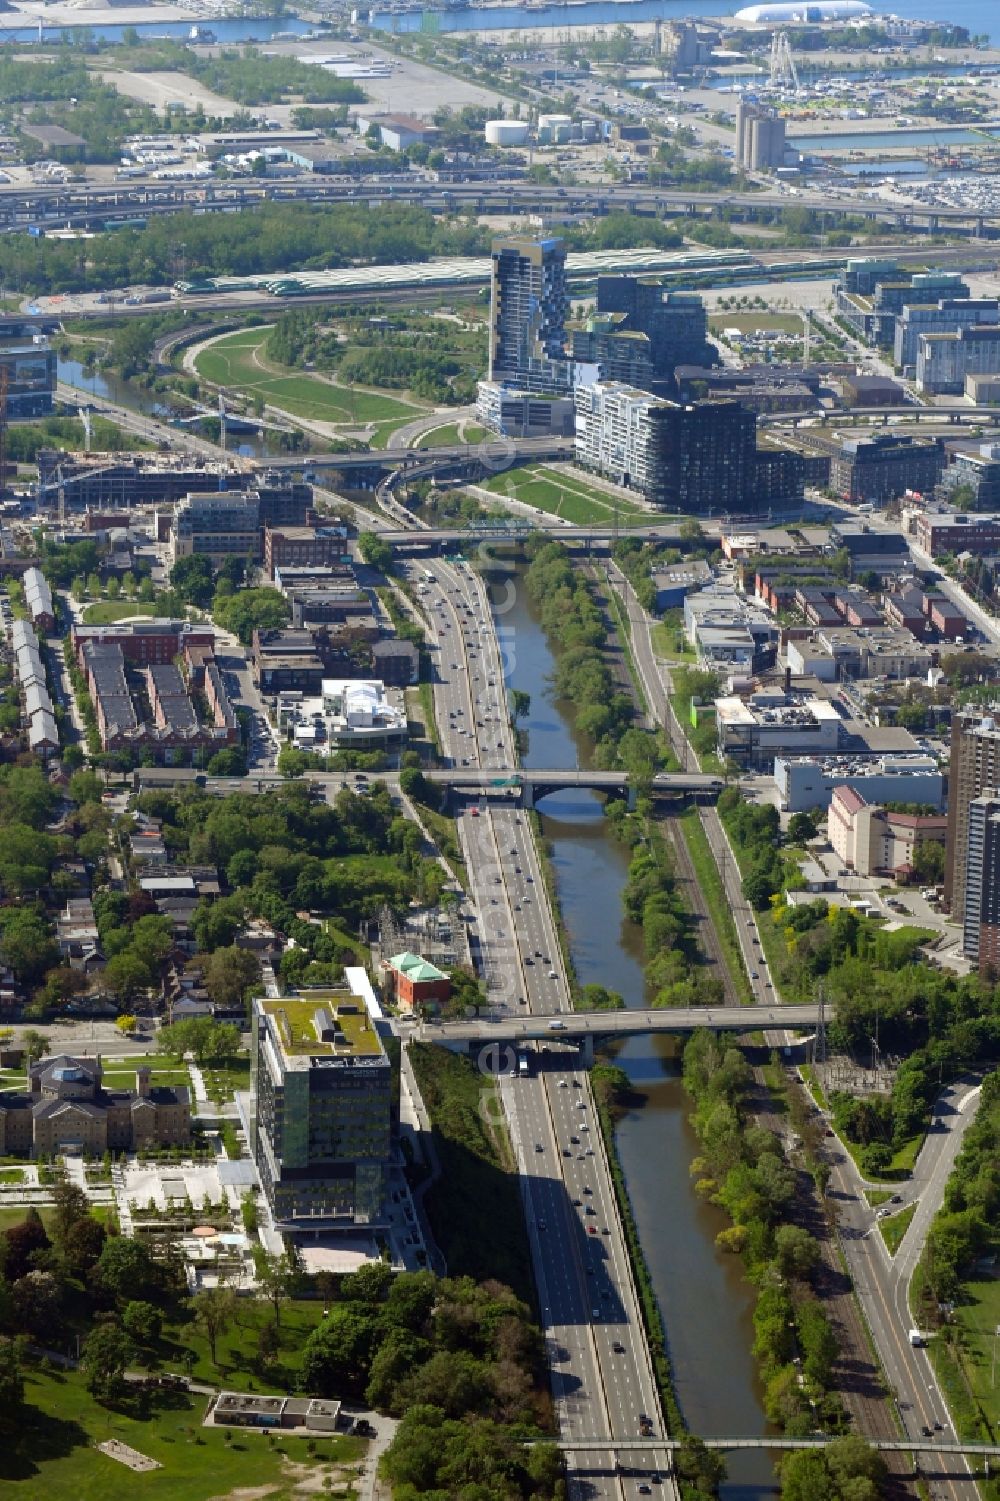 Aerial image Toronto - Channel flow and river banks of the waterway shipping Don River along the Don Vallay Pkwy in Toronto in Ontario, Canada